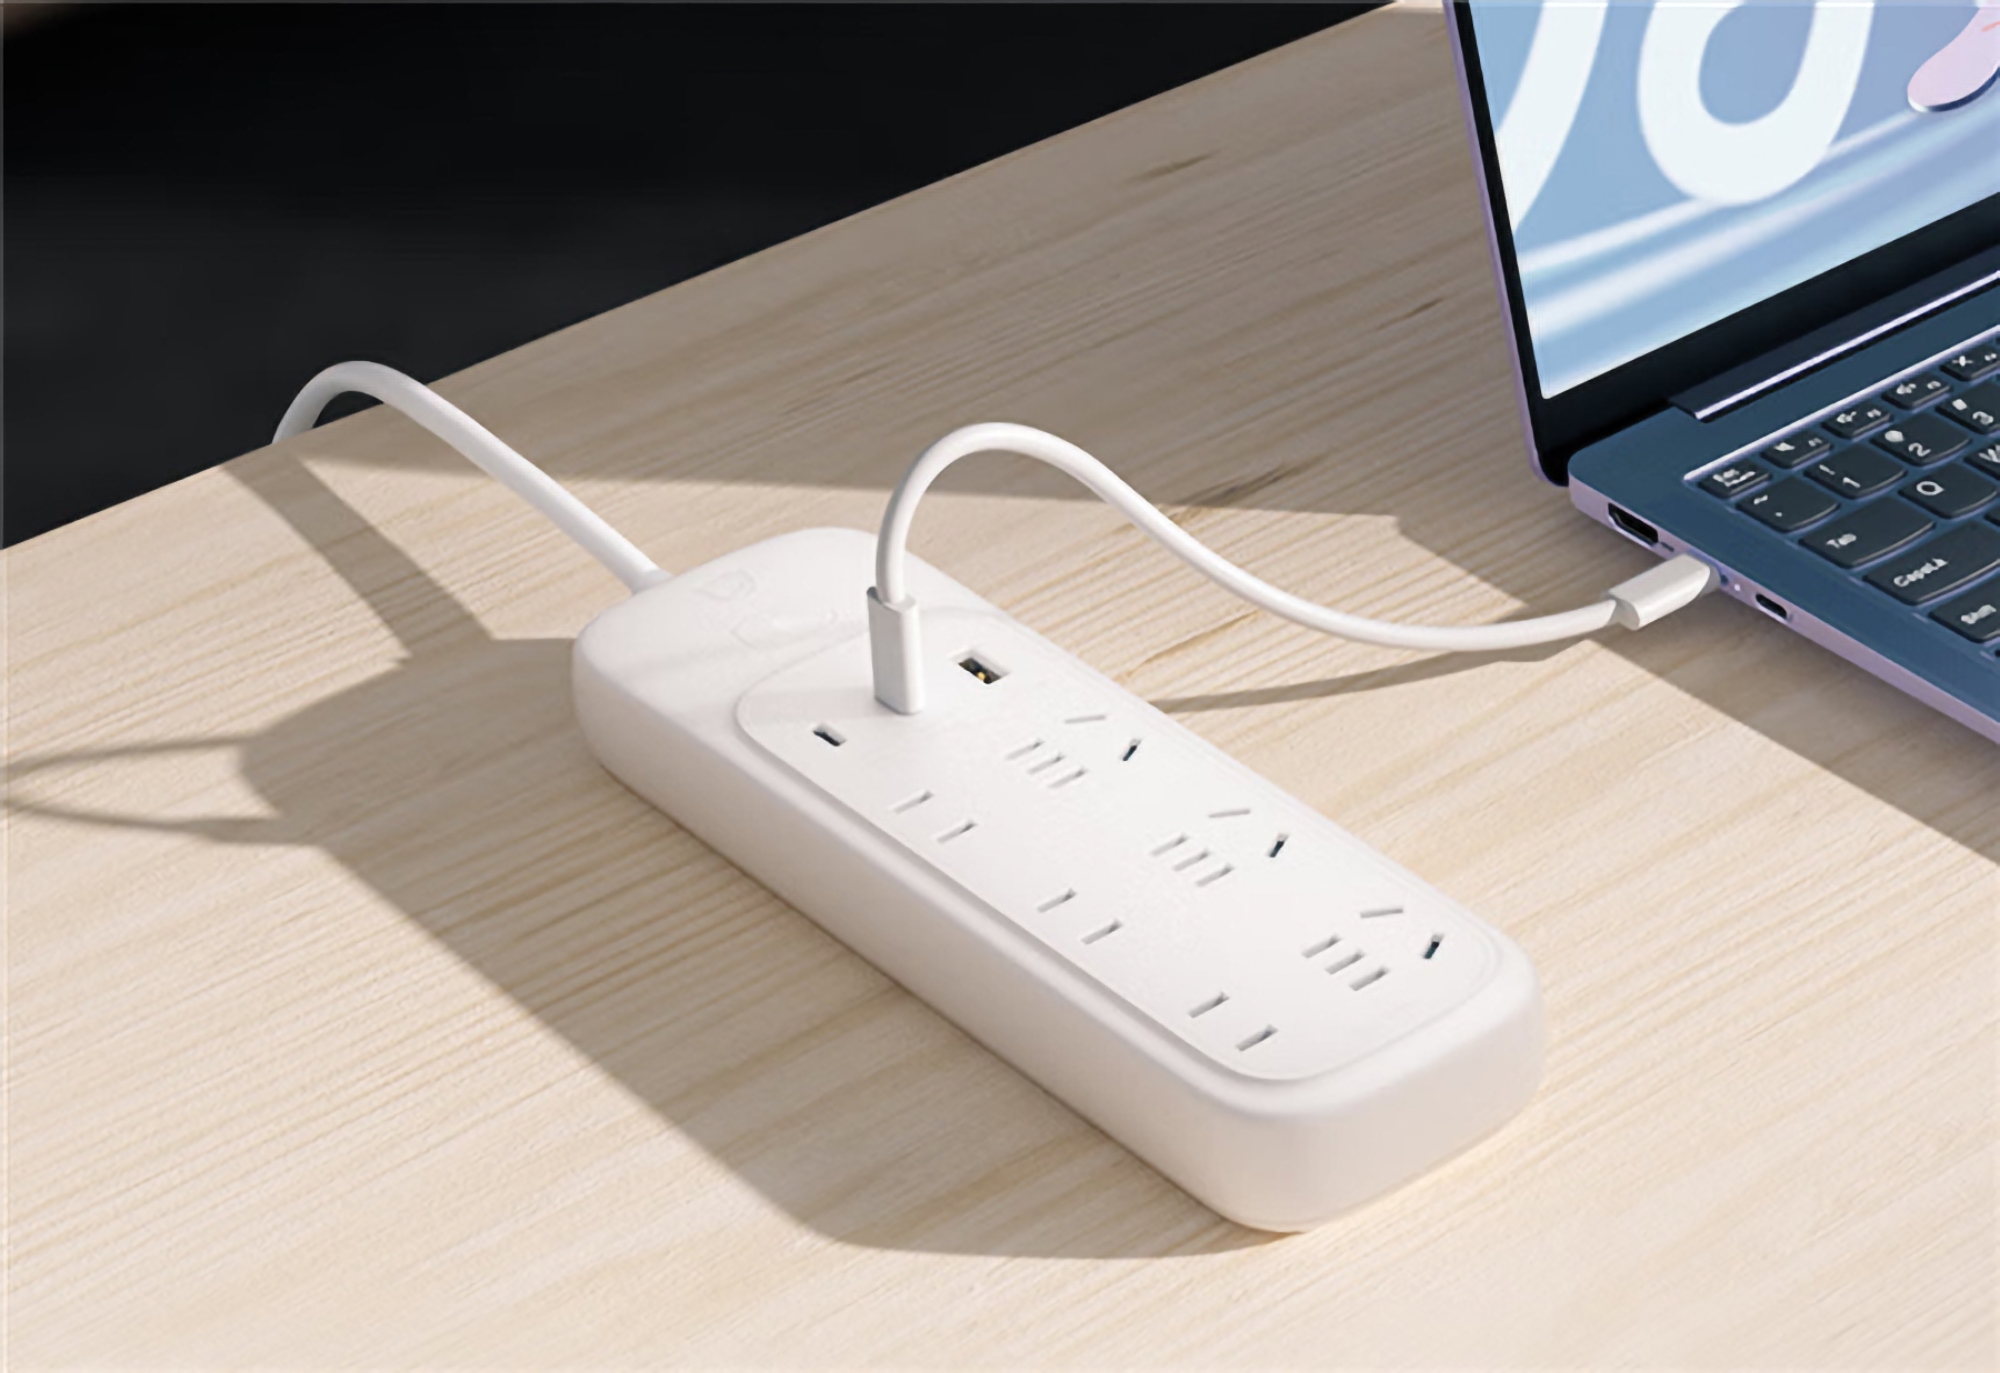 Lenovo launches 65-watt surge protector with 6 outlets and 3 USB ports for $23